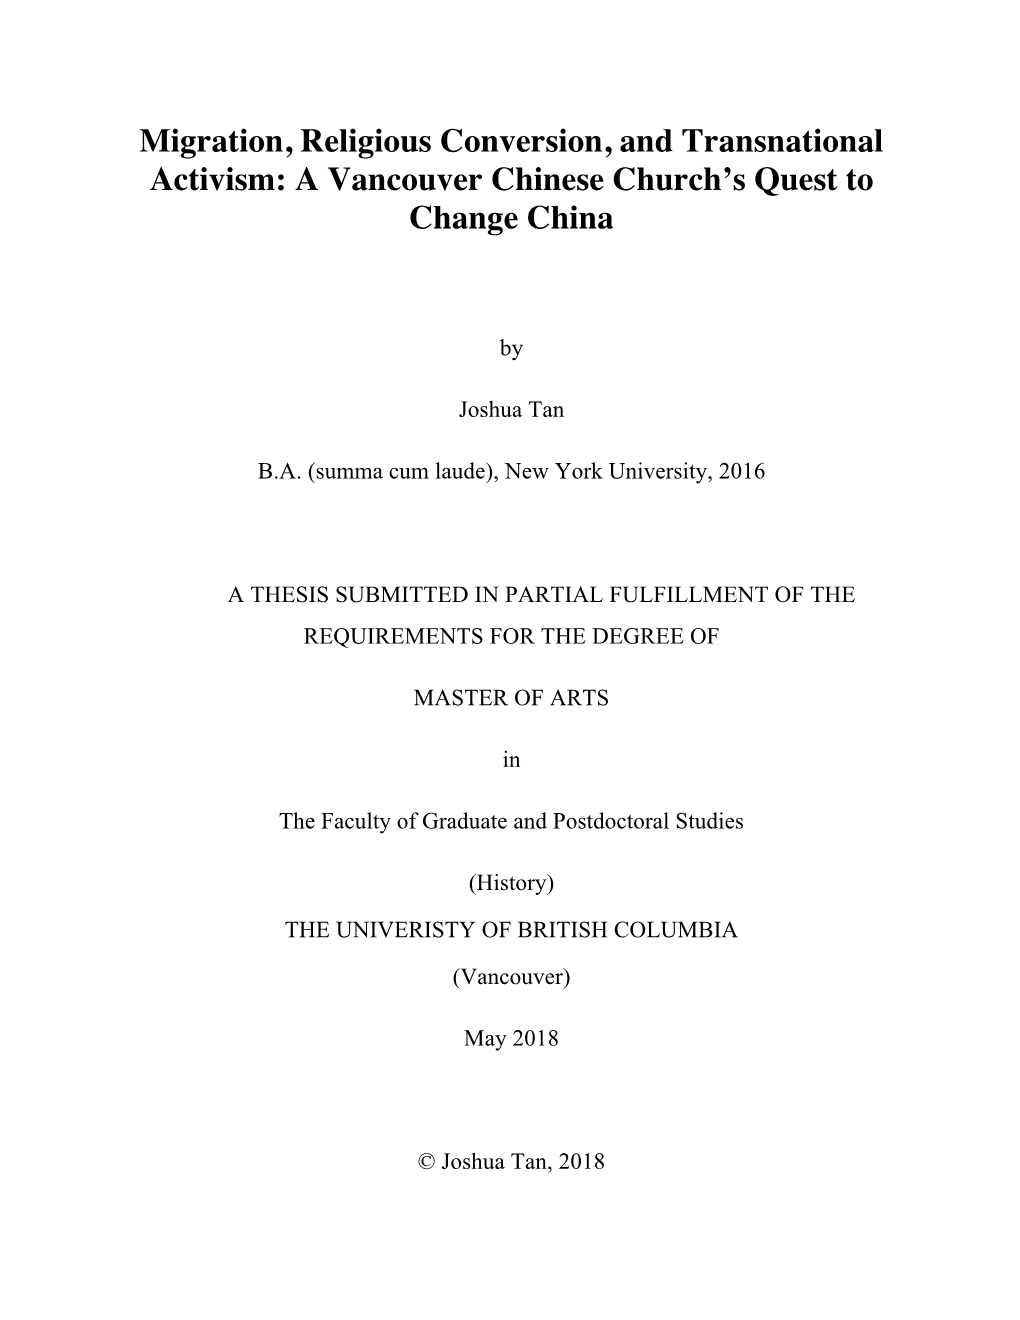 A Vancouver Chinese Church's Quest to Change China